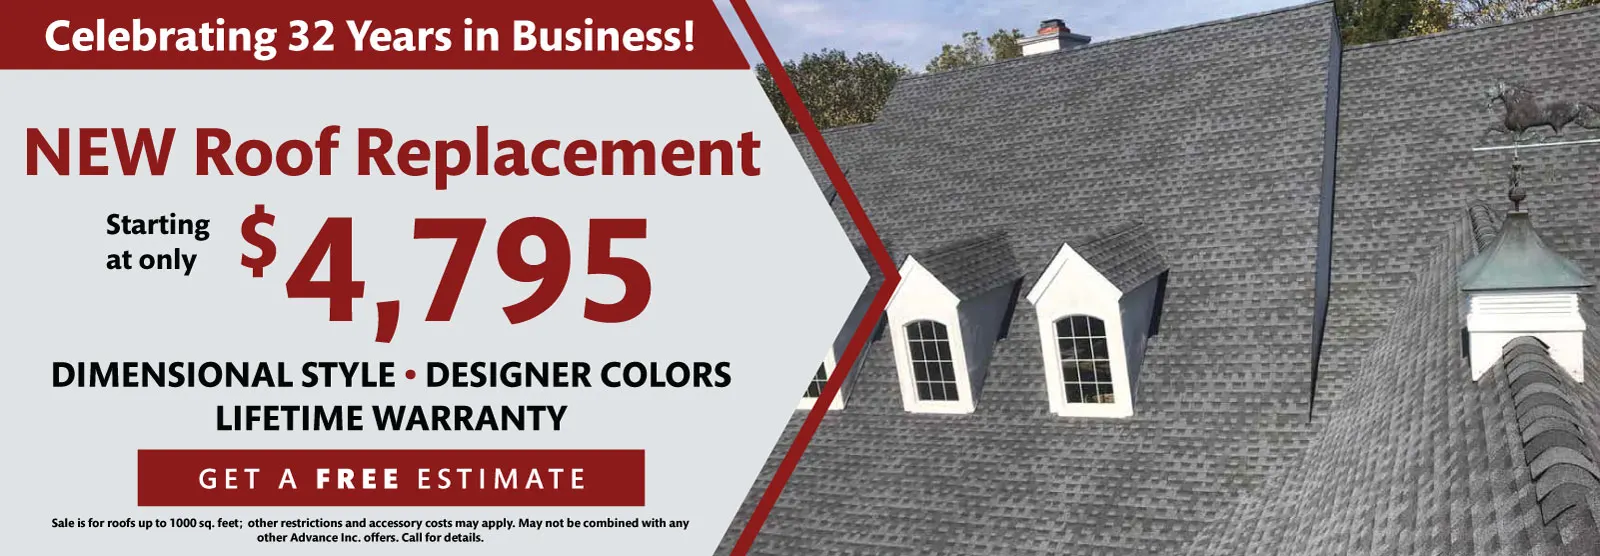 New Roof Replacement starting at $4795